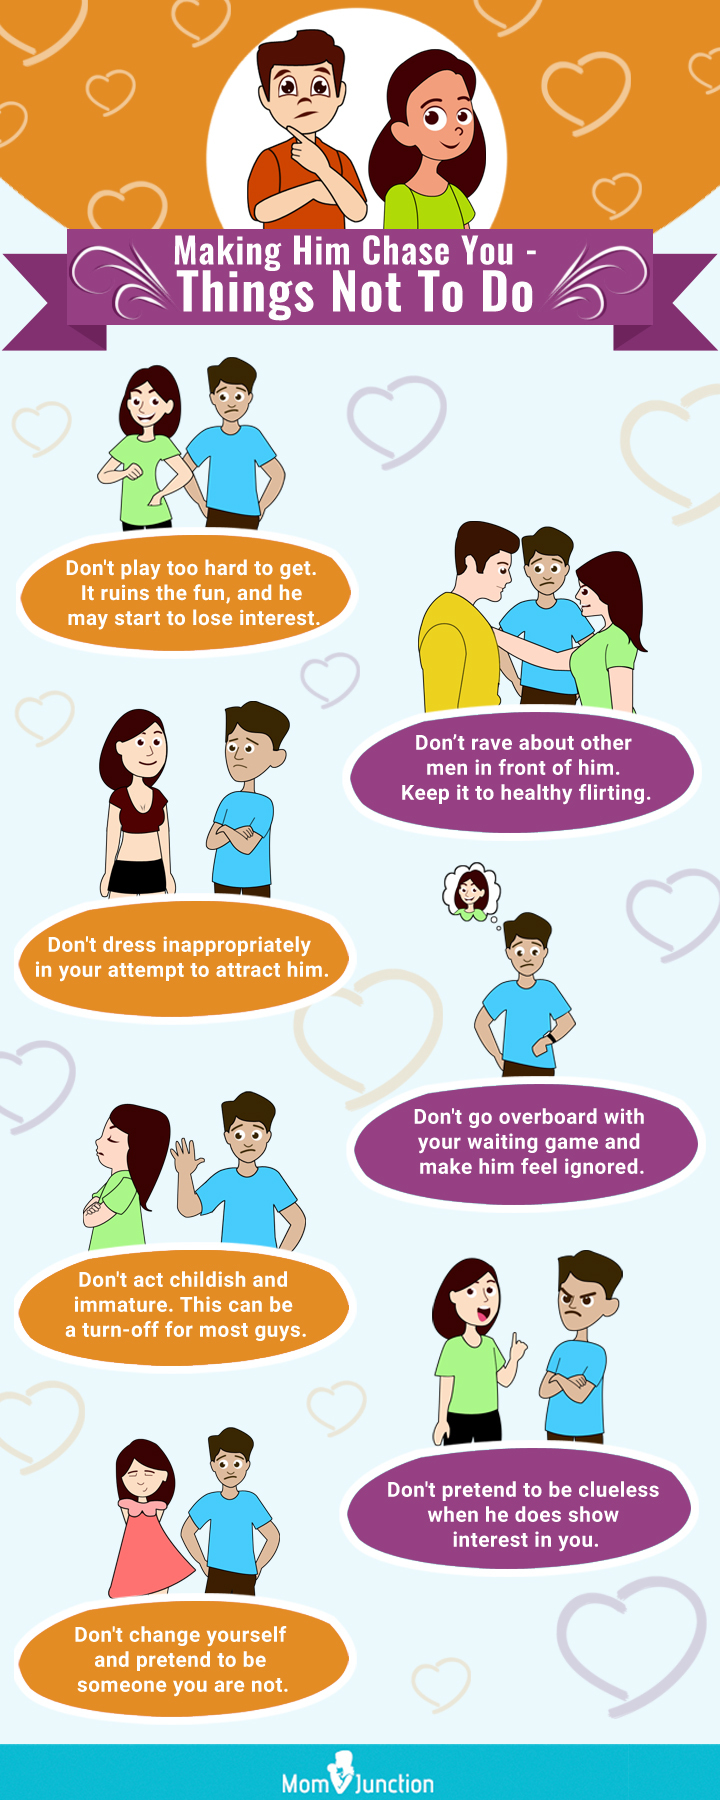 21 clever ways to make him chase you (infographic)